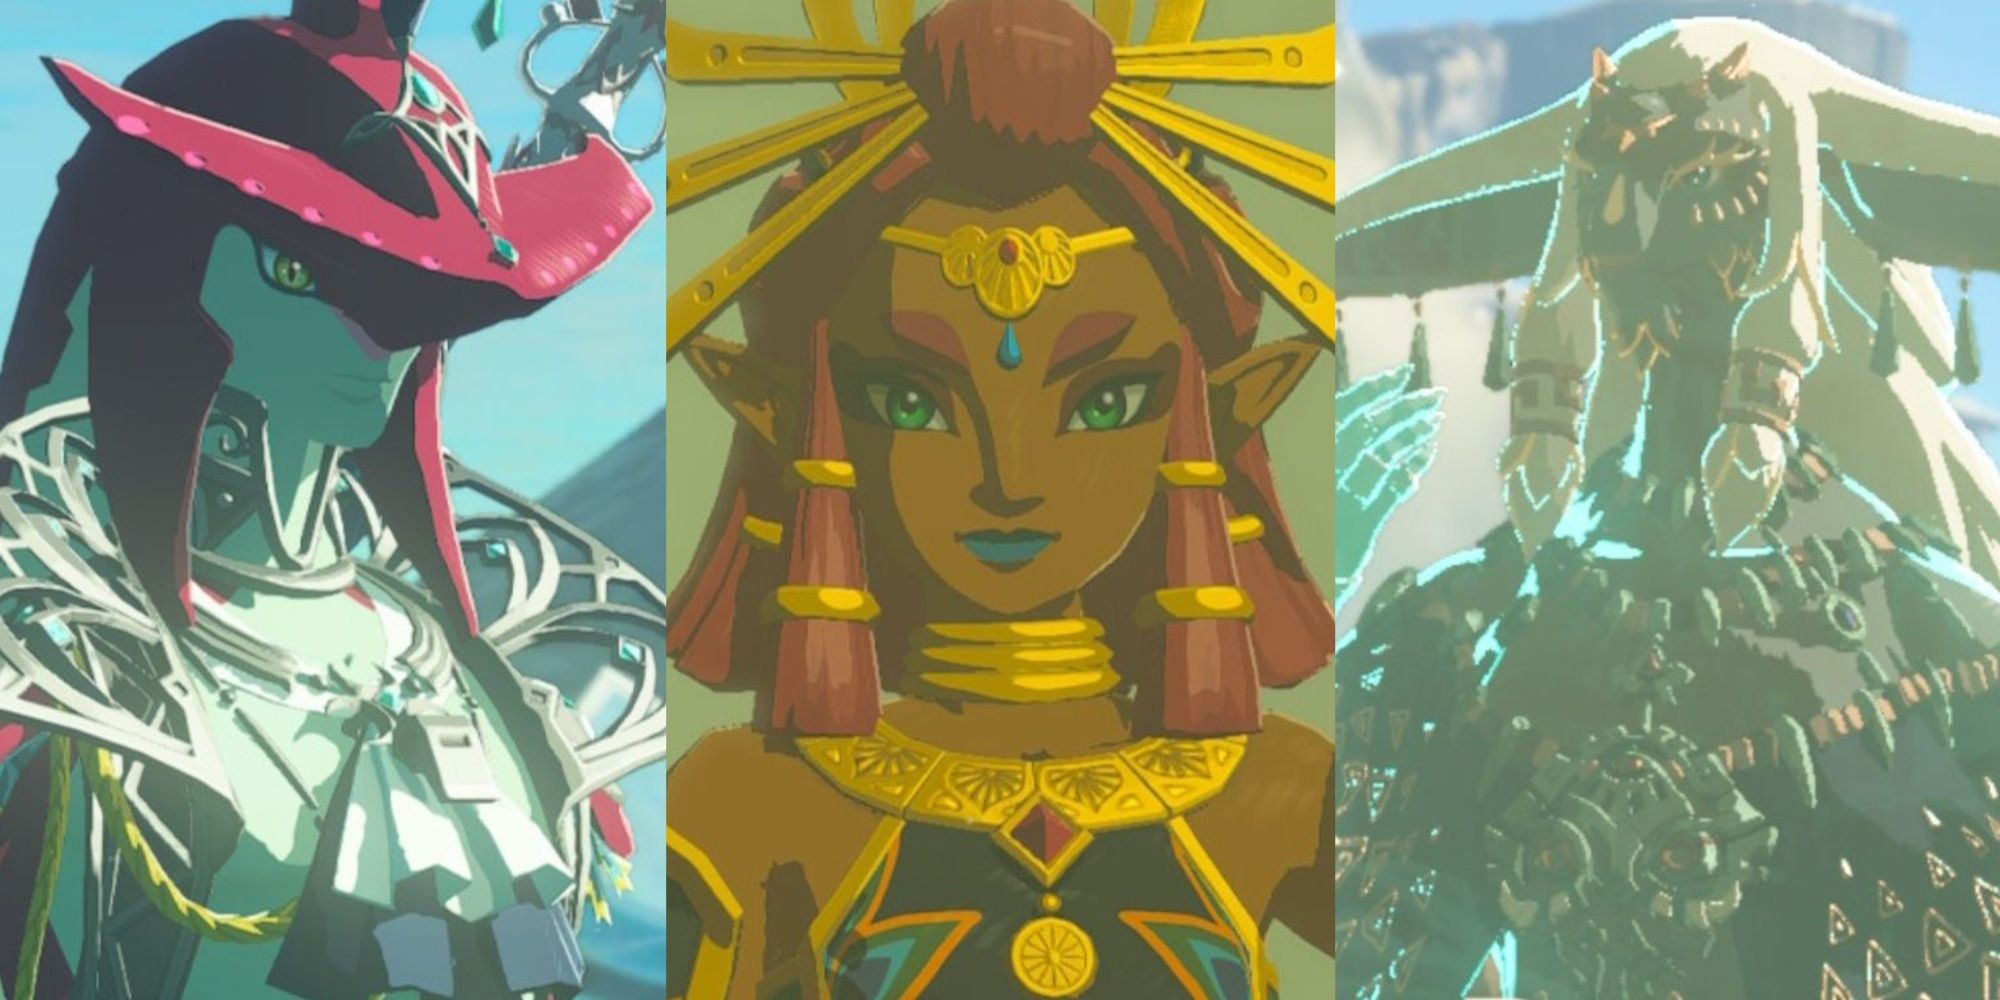 All Link abilities in The Legend of Zelda Tears of the Kingdom, ranked